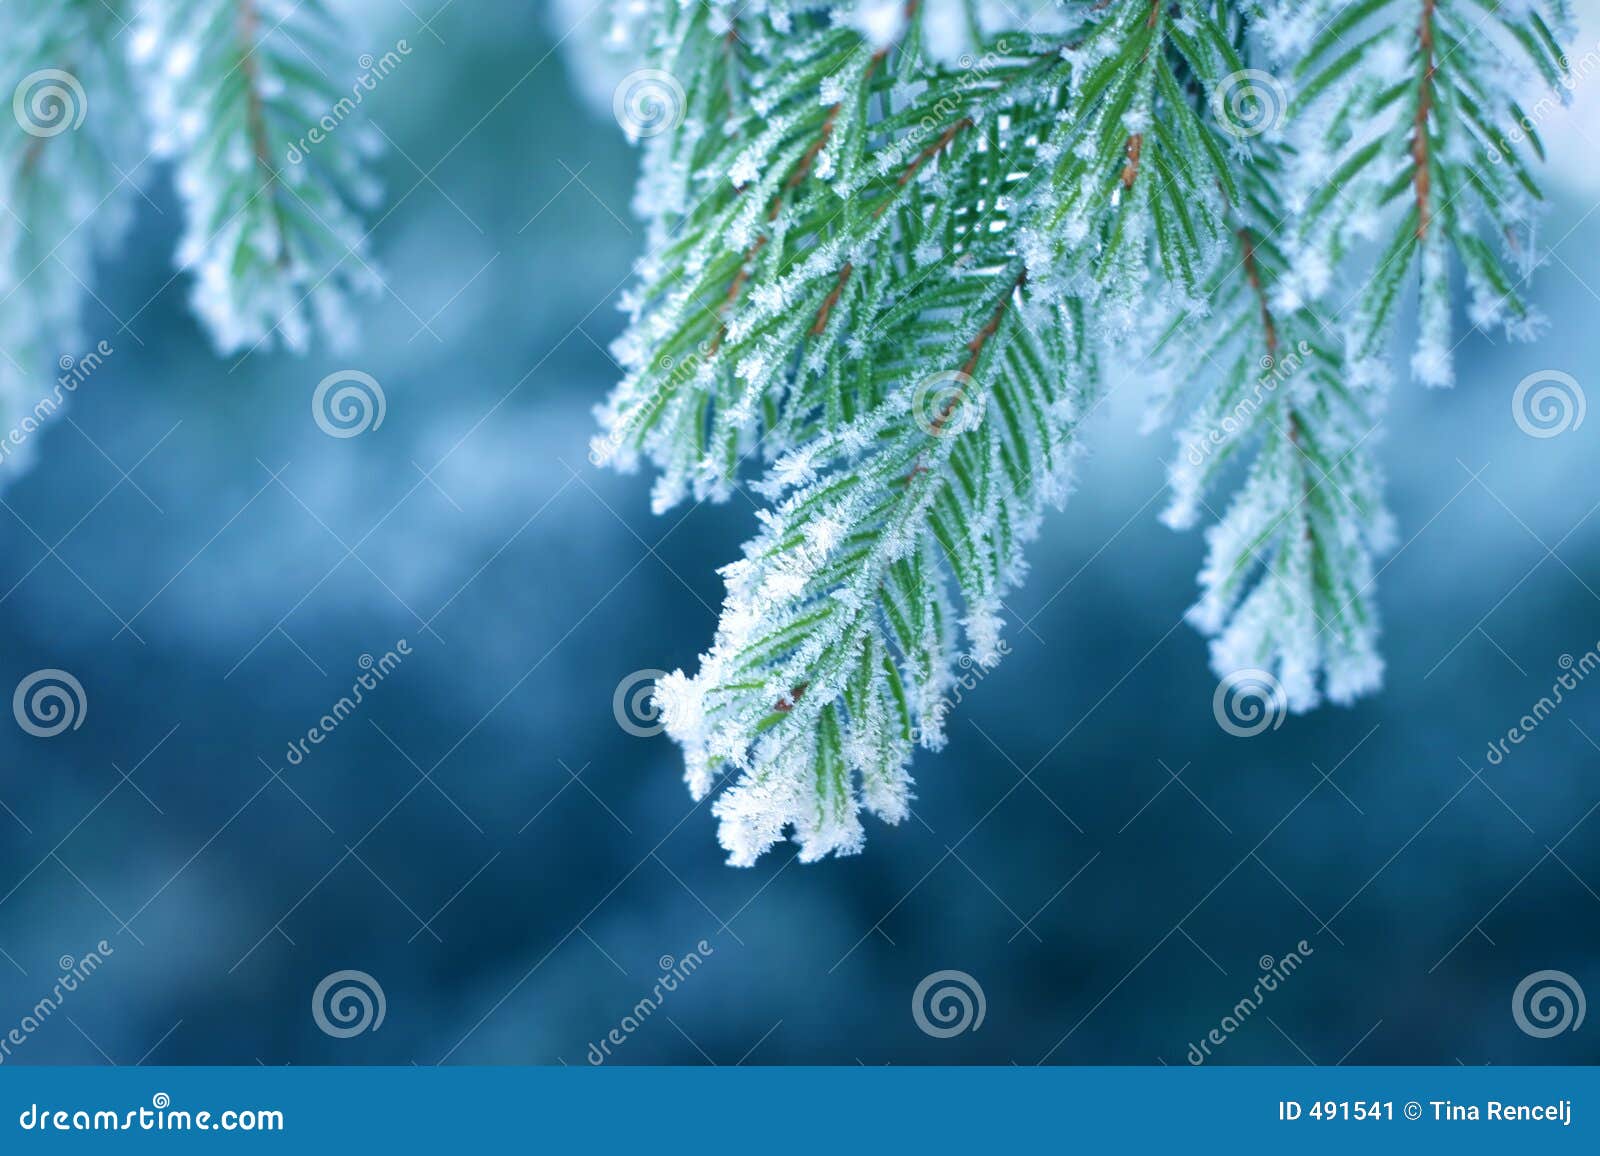 frost on pine